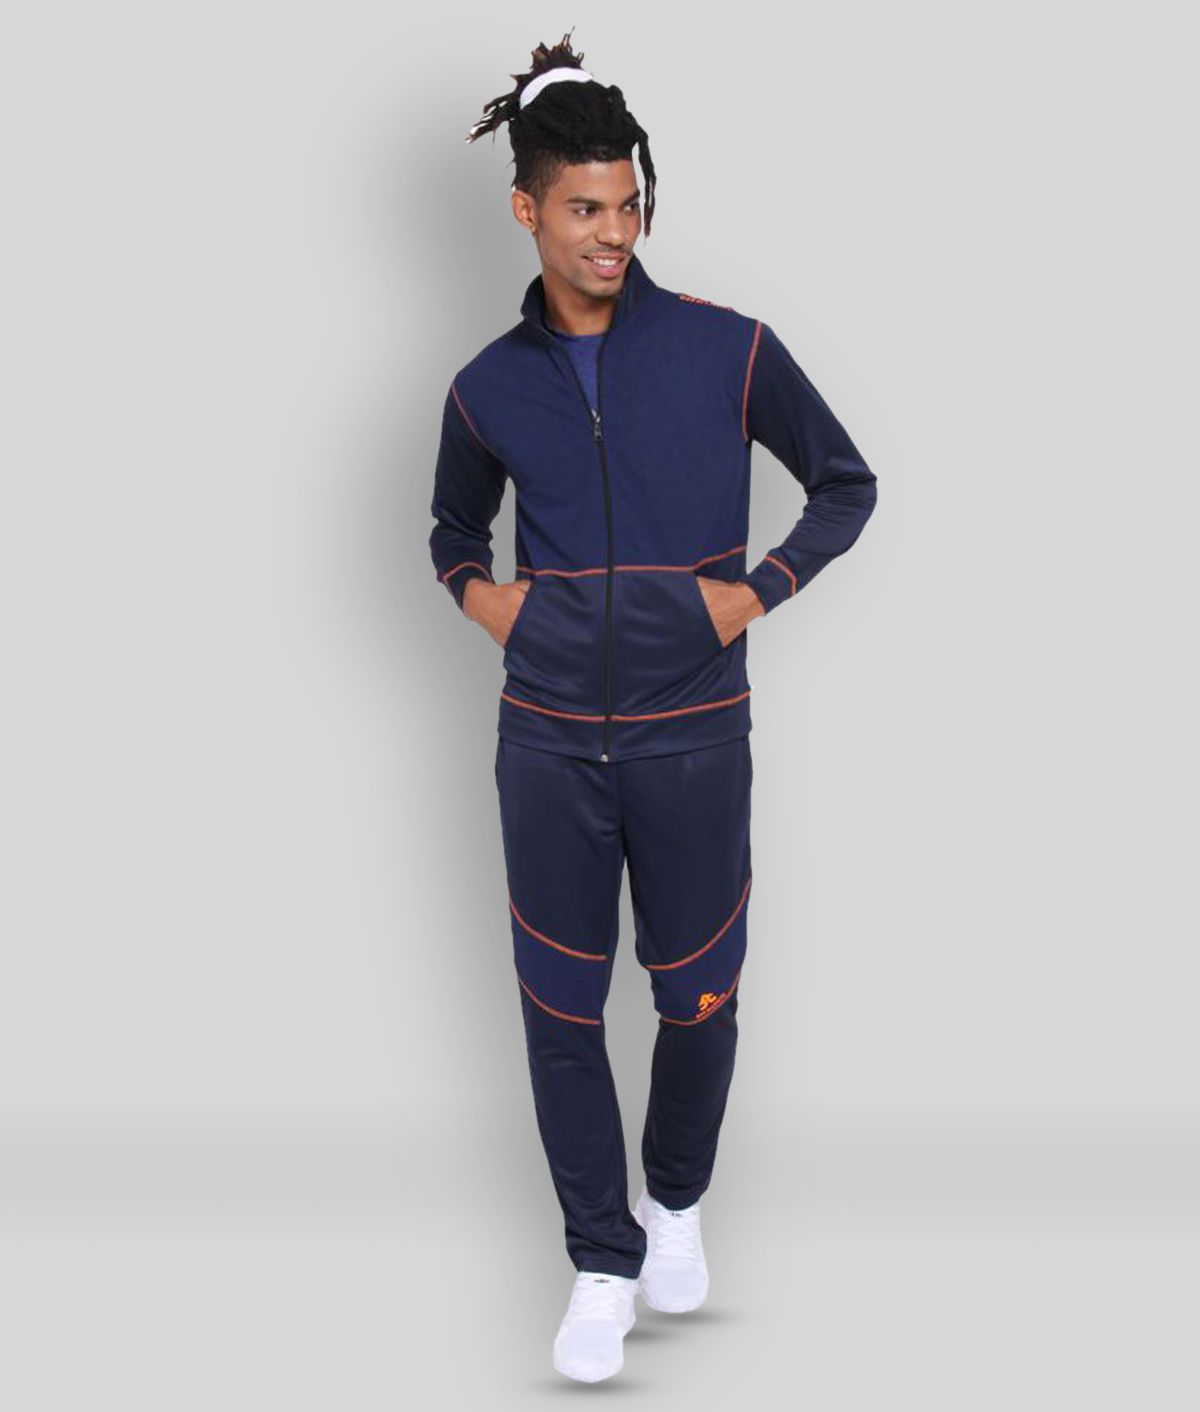     			OFF LIMITS - Navy Blue Polyester Regular Fit Colorblock Men's Sports Tracksuit ( Pack of 1 )